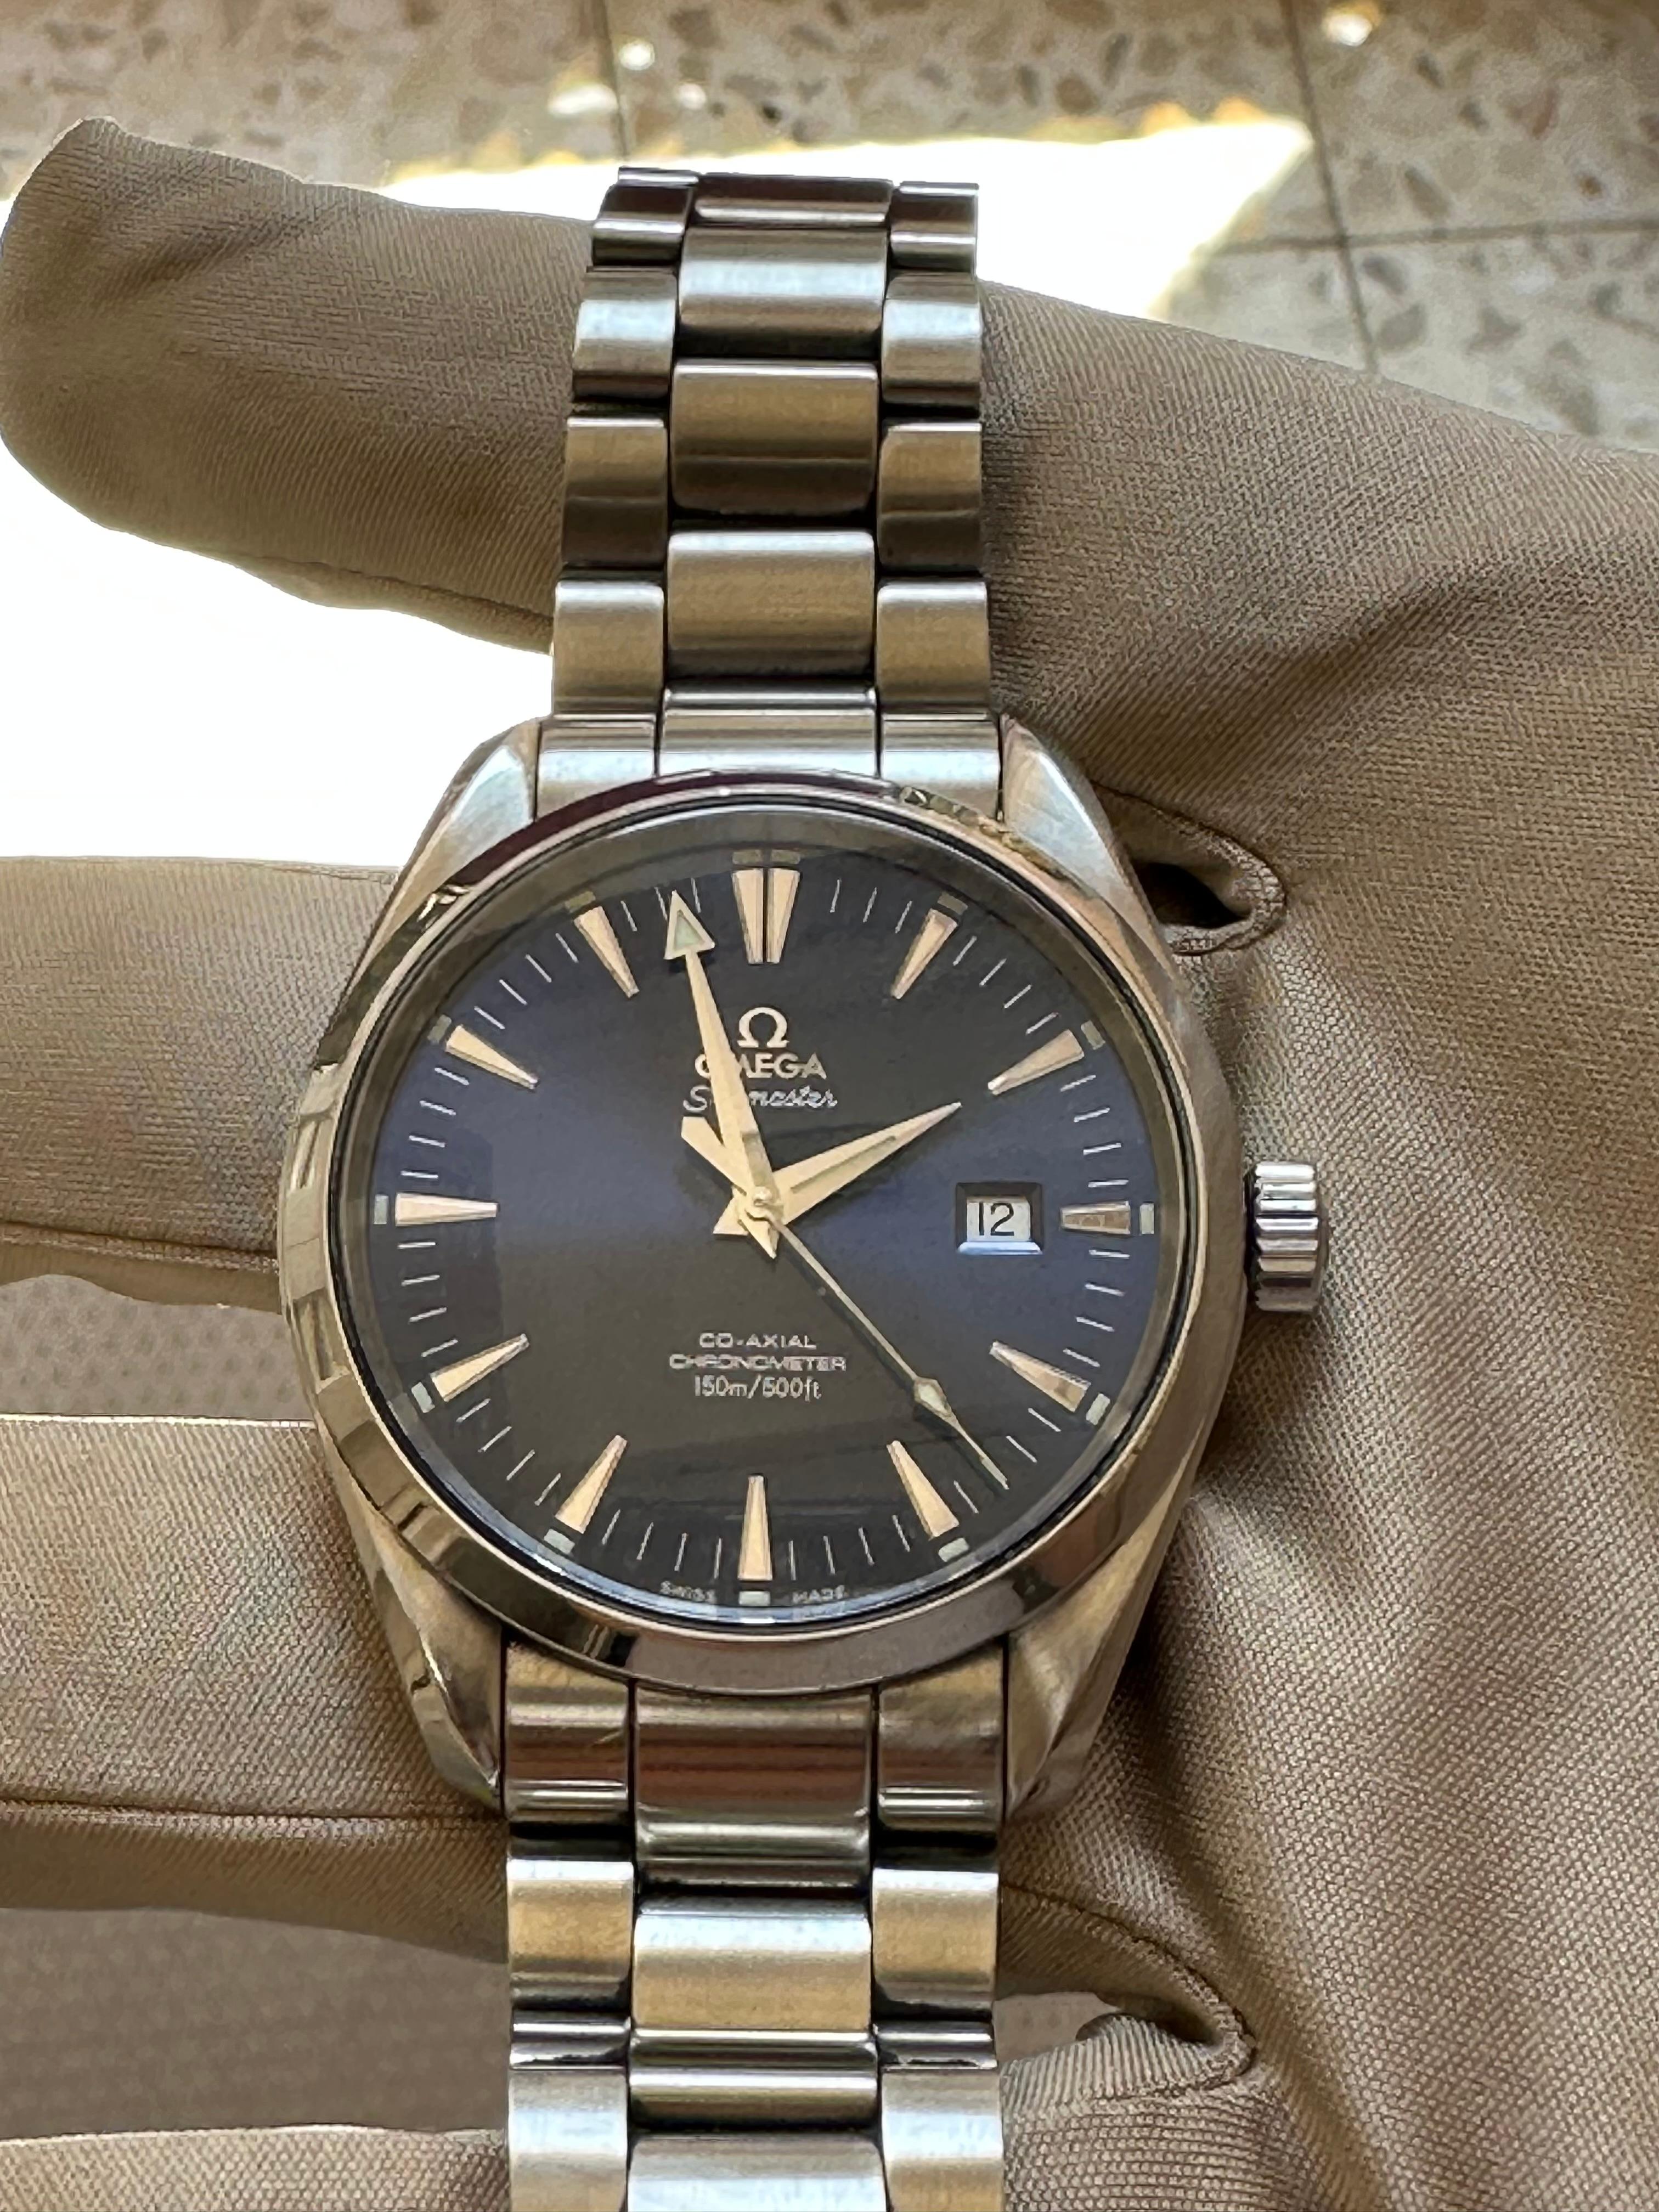 Brand: Omega

Model: Seamaster Aqua Terra Co-Axial Escapement

Country Of Manufacture: Switzerland

Movement: Automatic

Case Material: Stainless steel

Measurements : Case width: 42 mm. (without crown)

Band Type : Stainless steel

Band Condition :